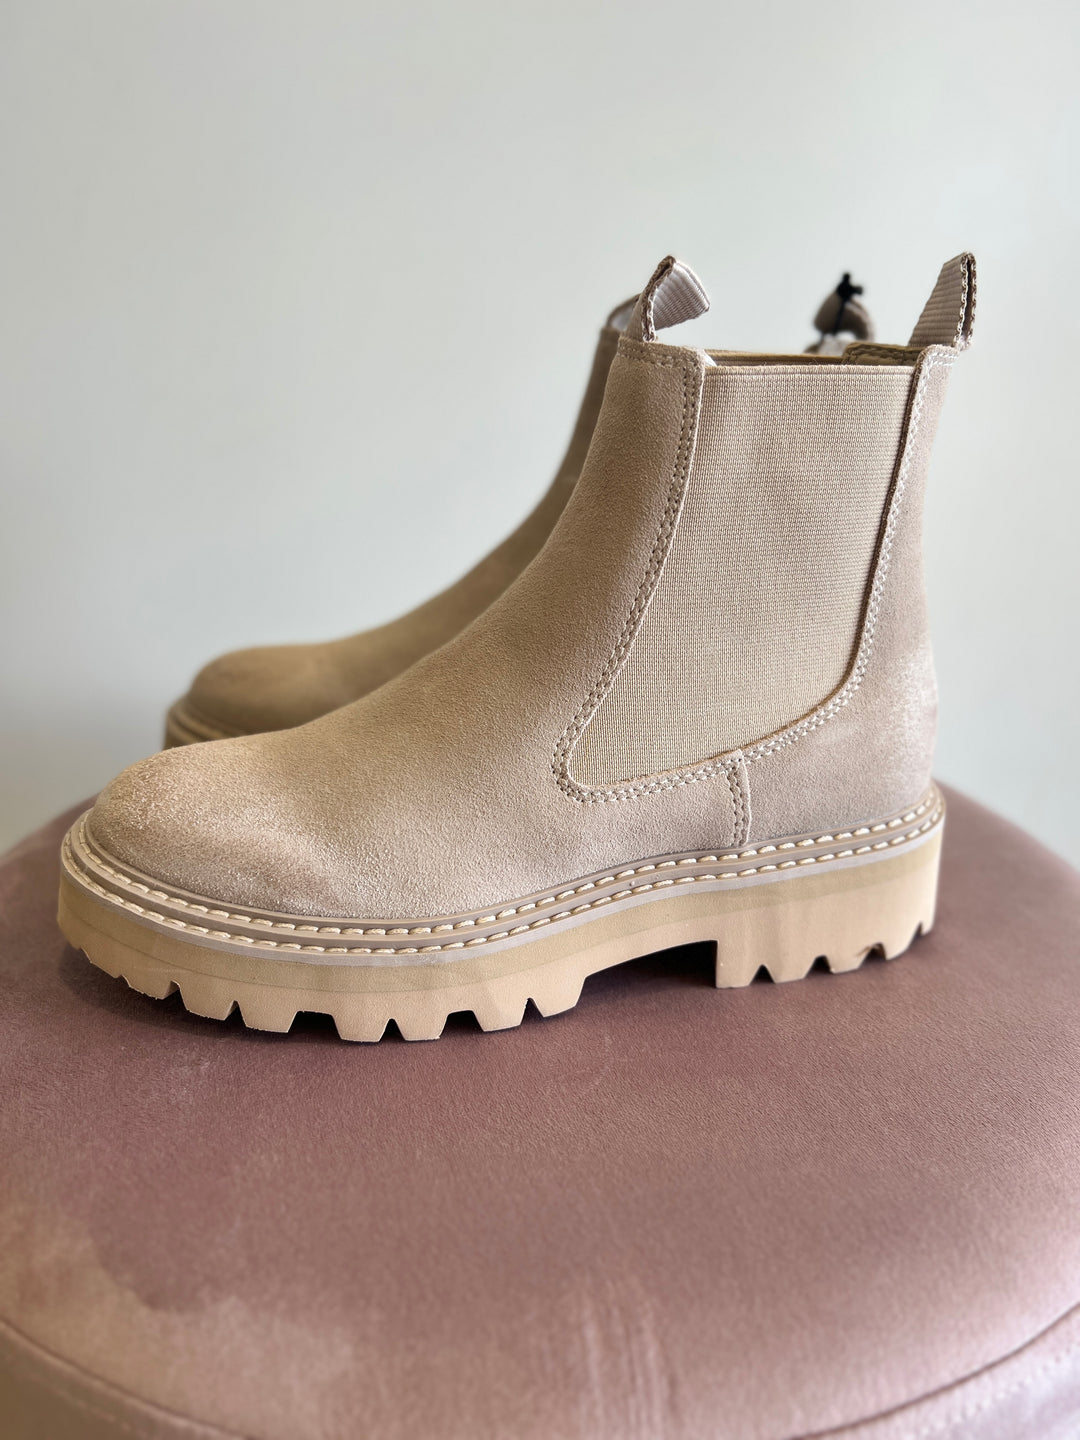 The Willow Lug Boot